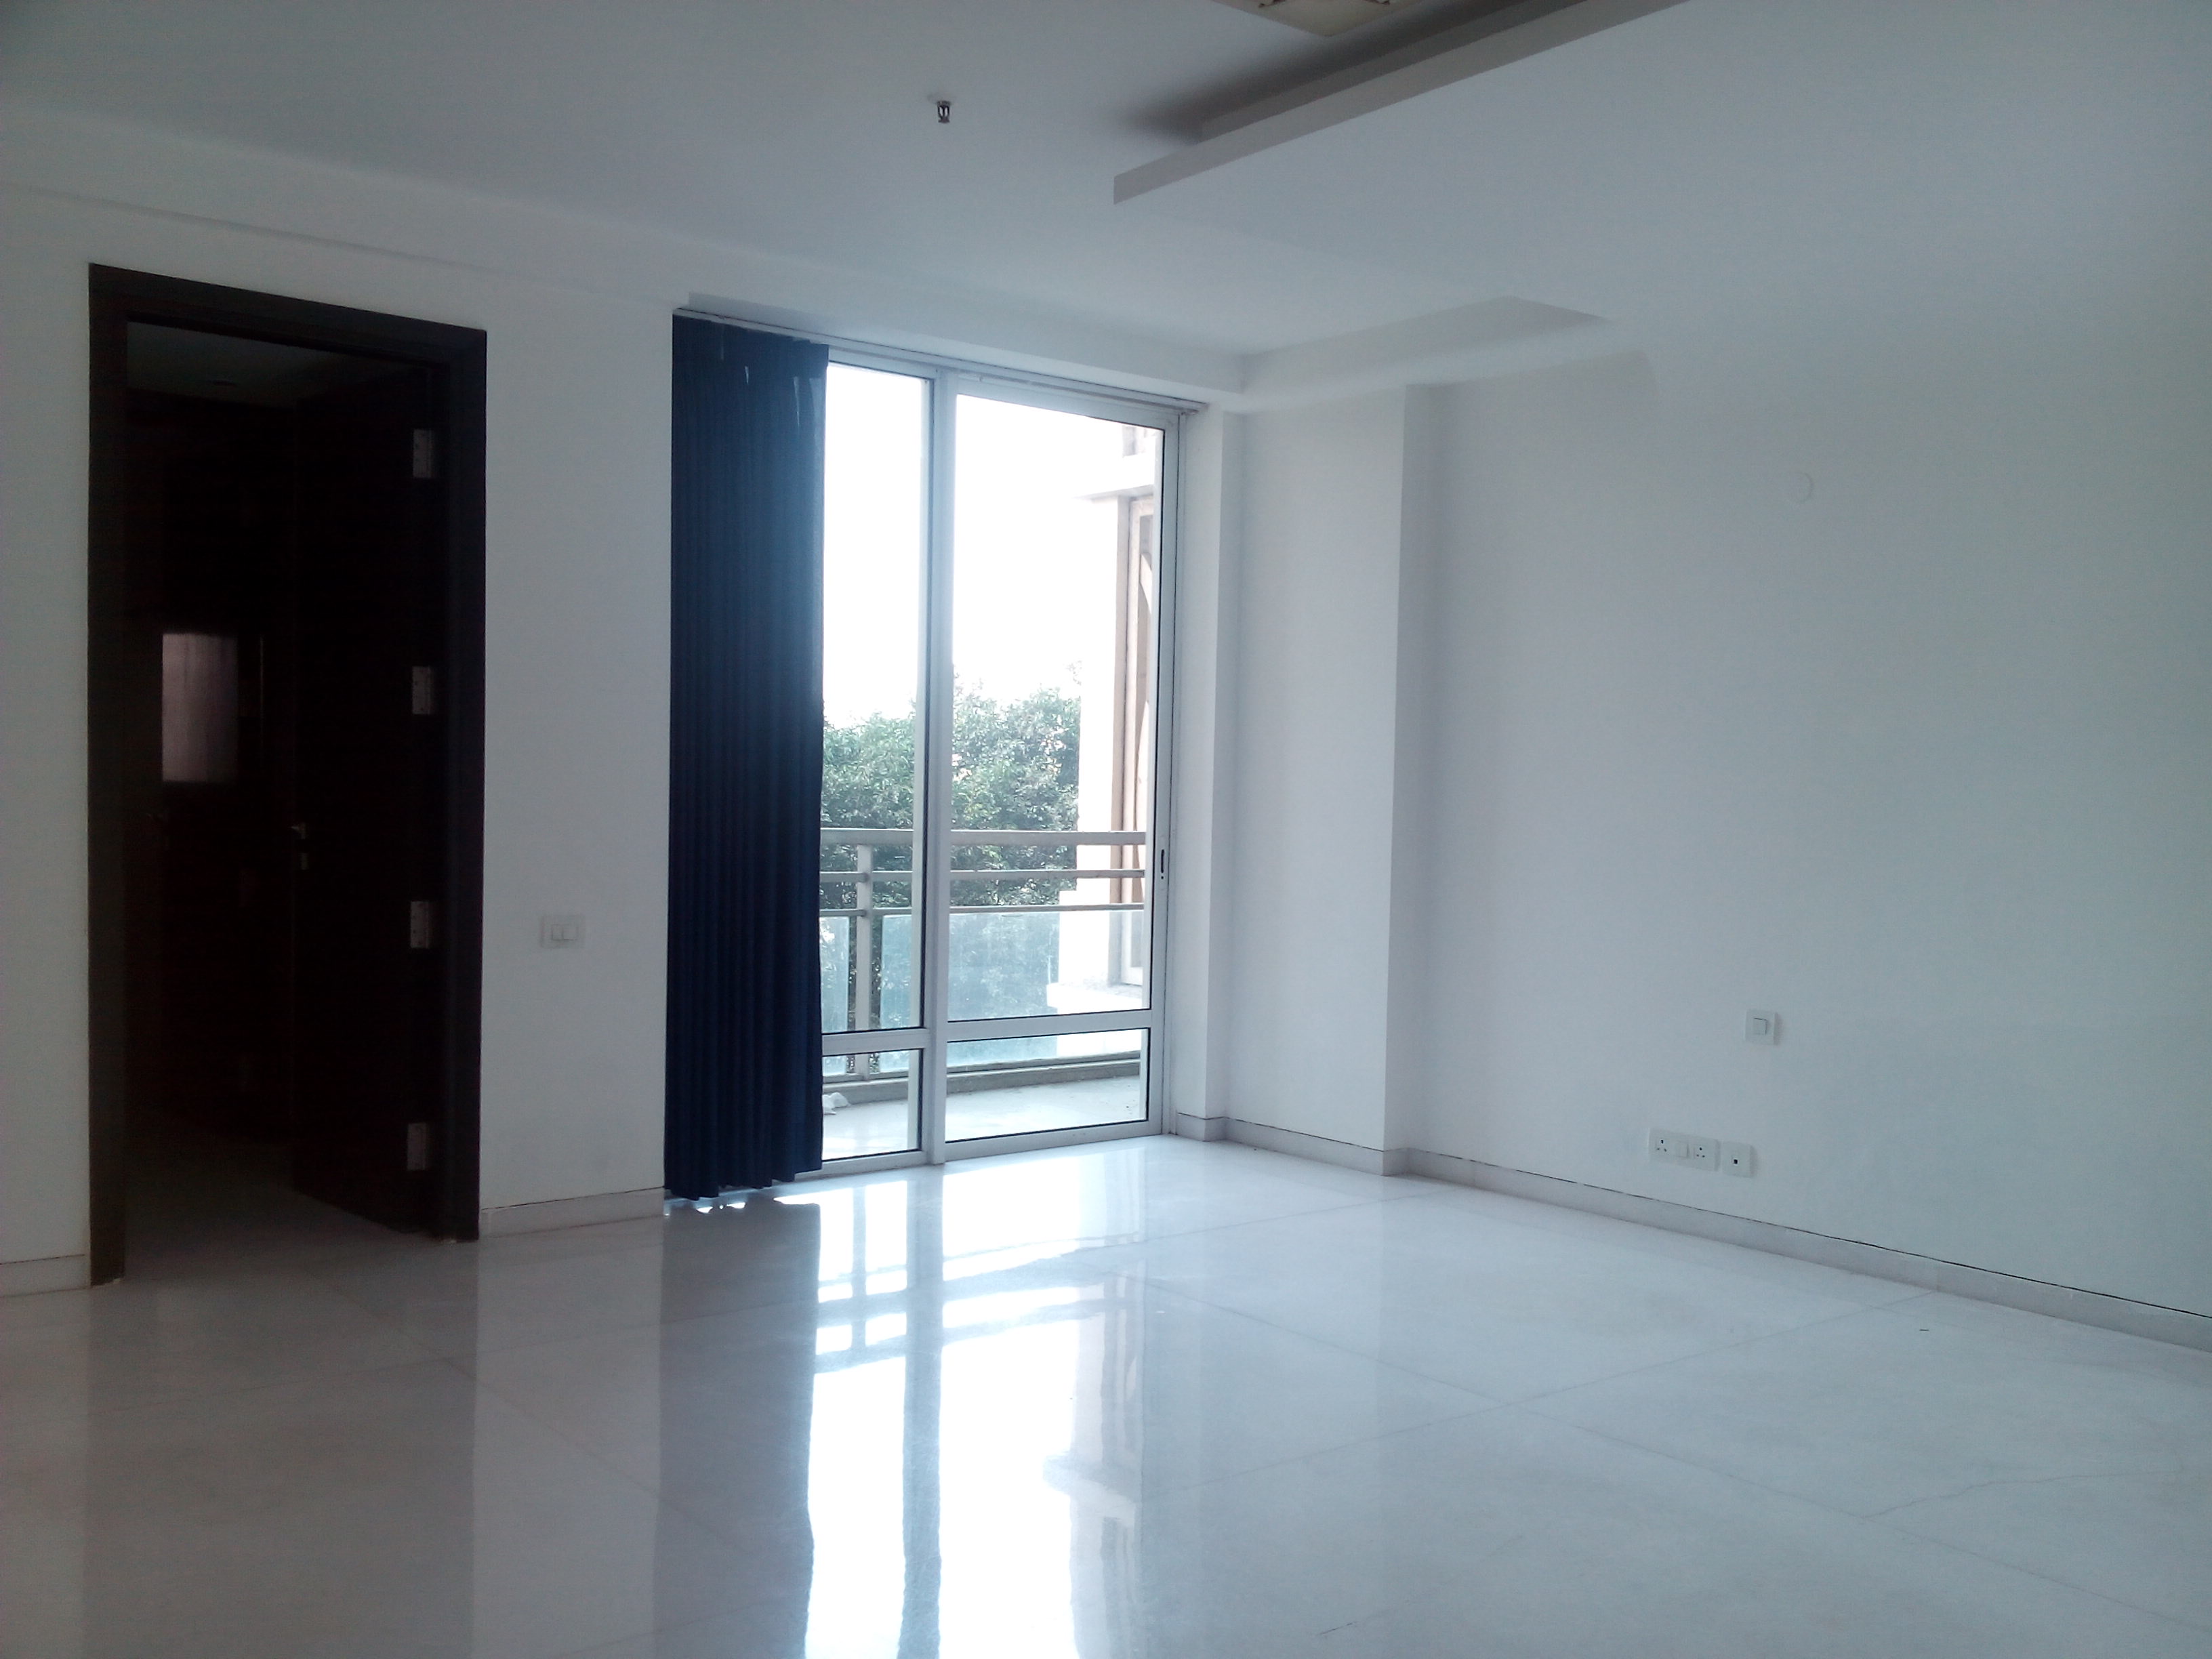 5 Bhk Semi Furnished Apartment for Rent in Golf Course Road, Gurgaon